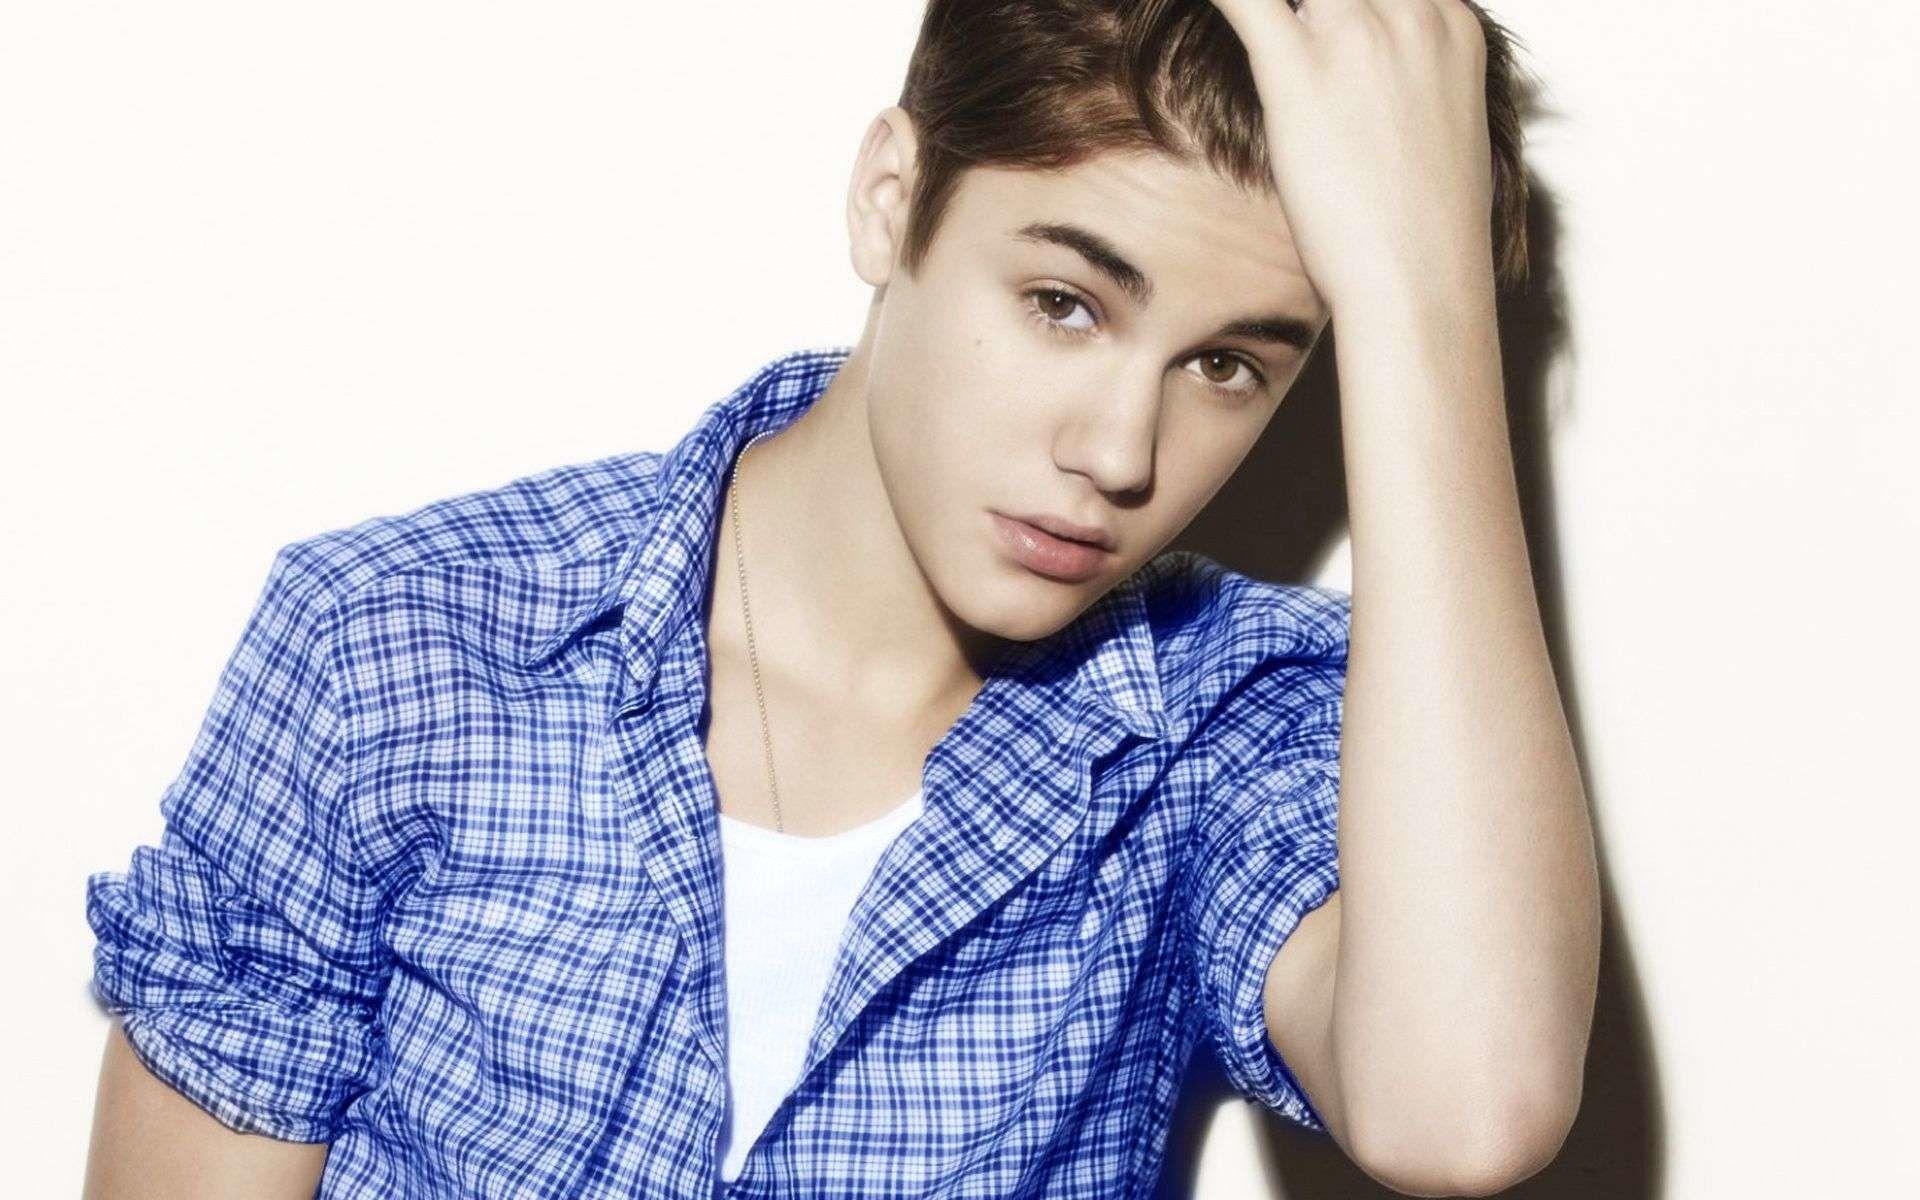 Justin Bieber HD Wallpaper and Latest Image